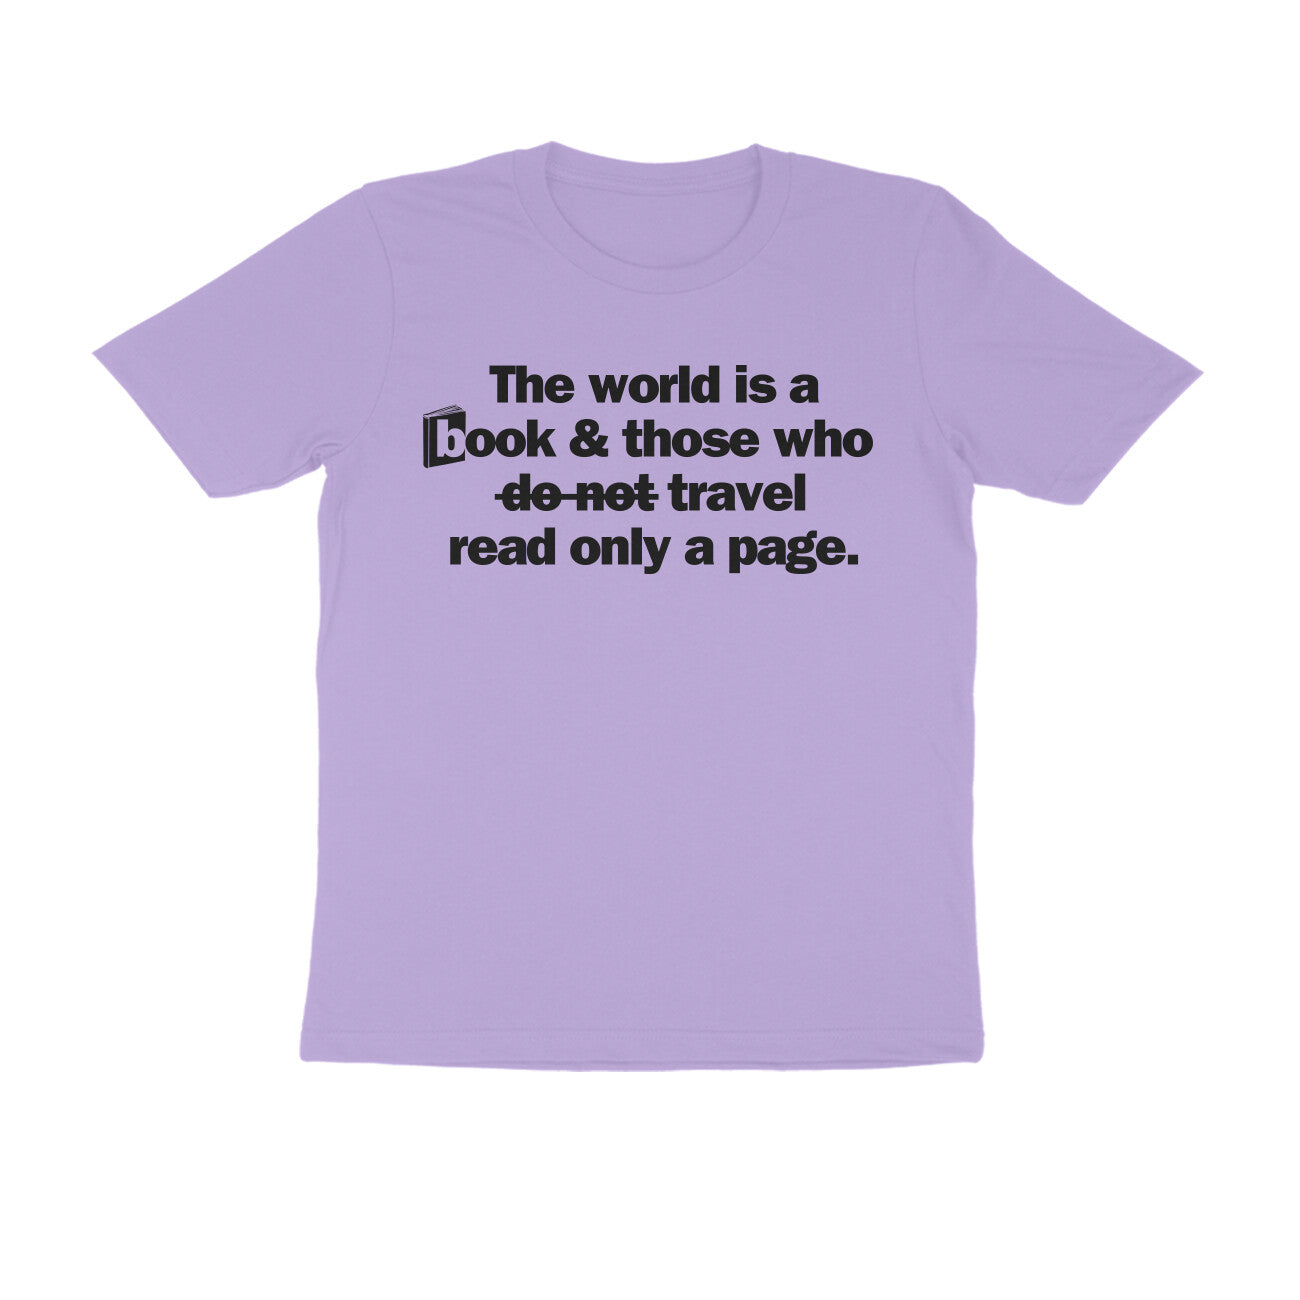 The world is a book... Black Text Men's T-shirt